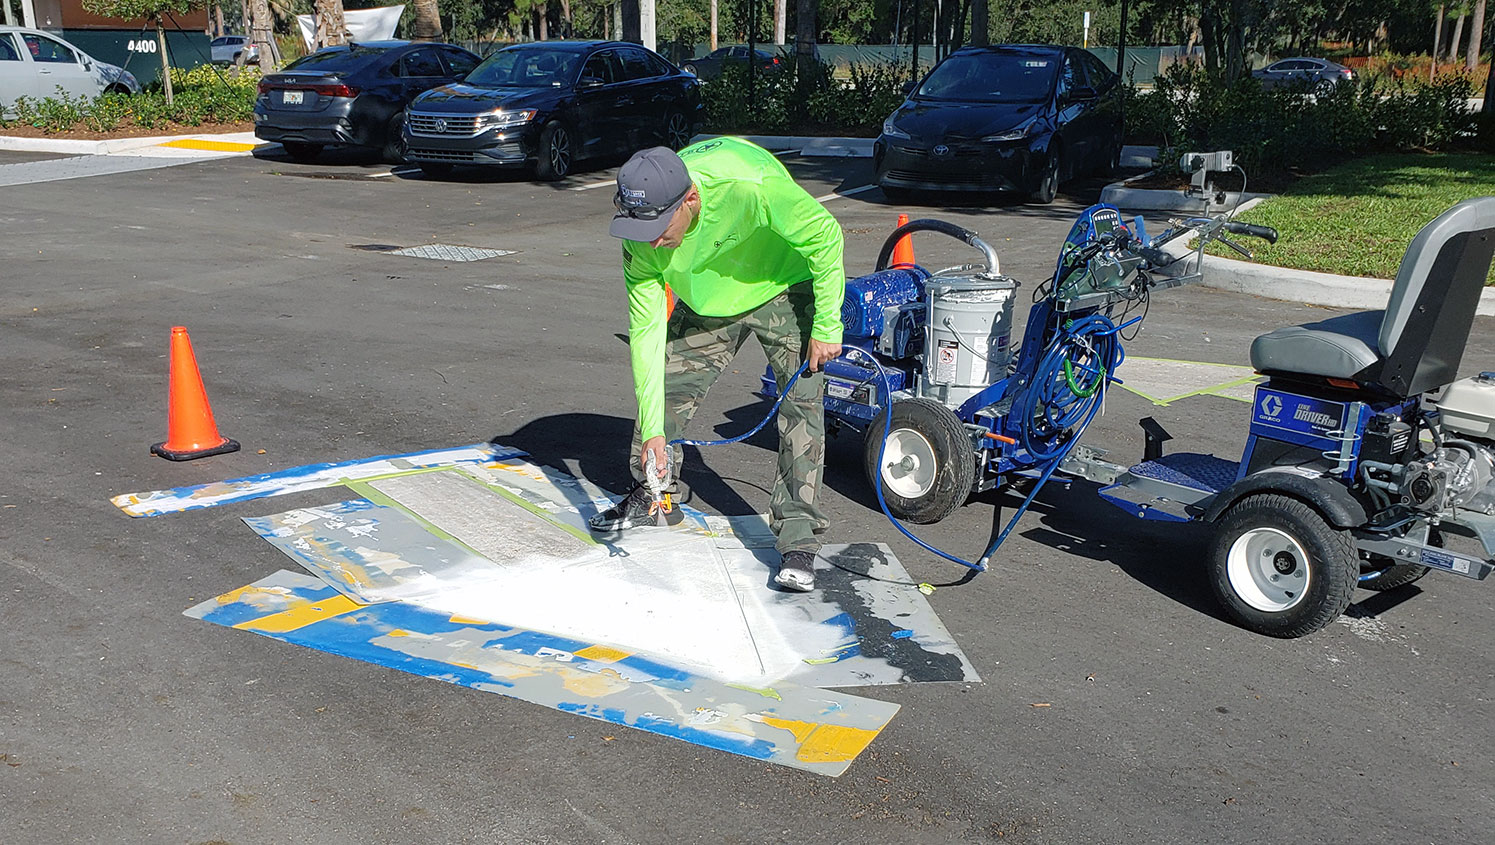 G-FORCE worker applying paint to arrow stencil